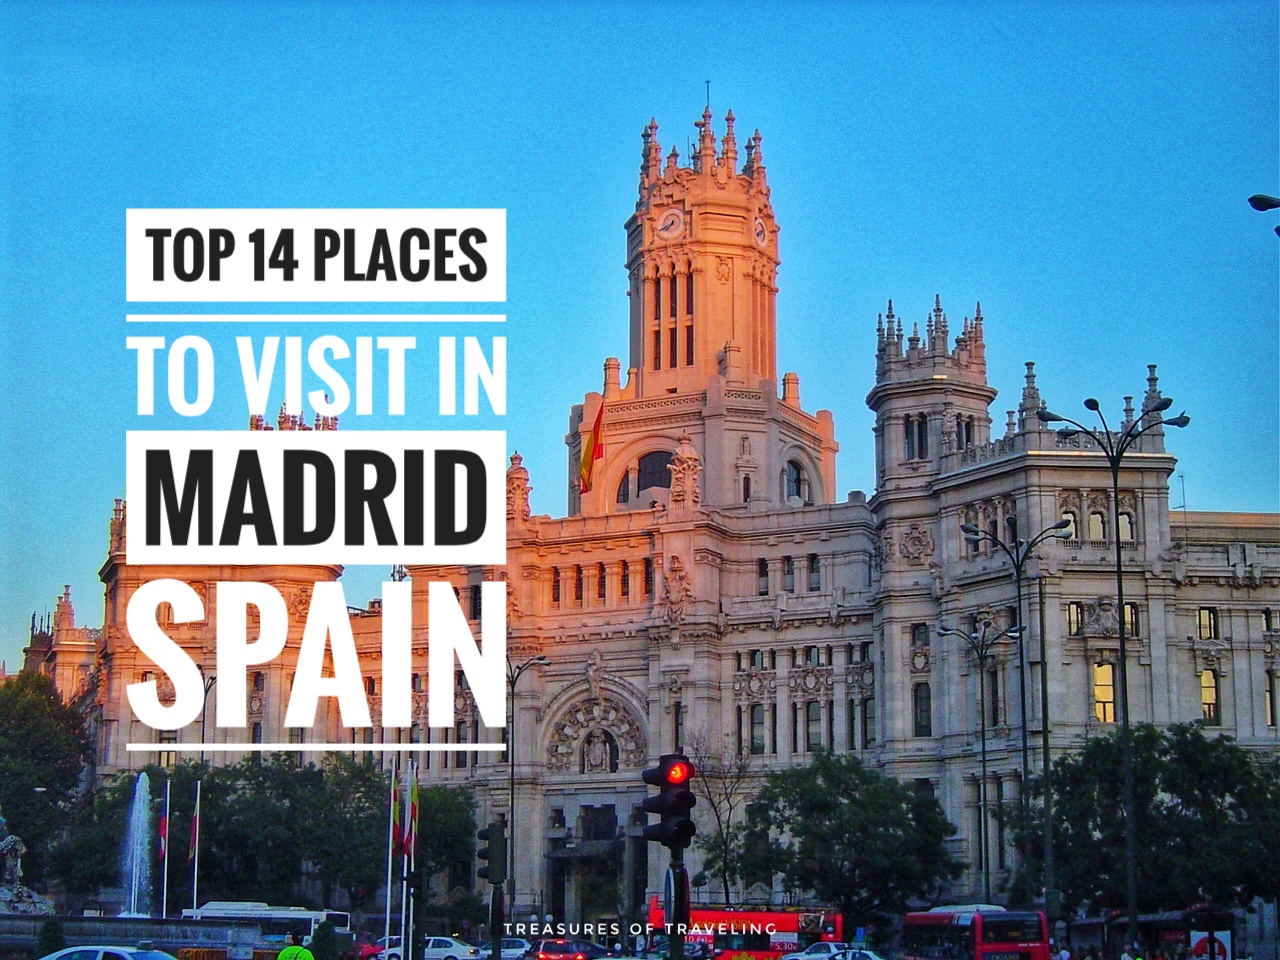 Top 14 Places to Visit in Madrid, Spain! - Treasures of Traveling